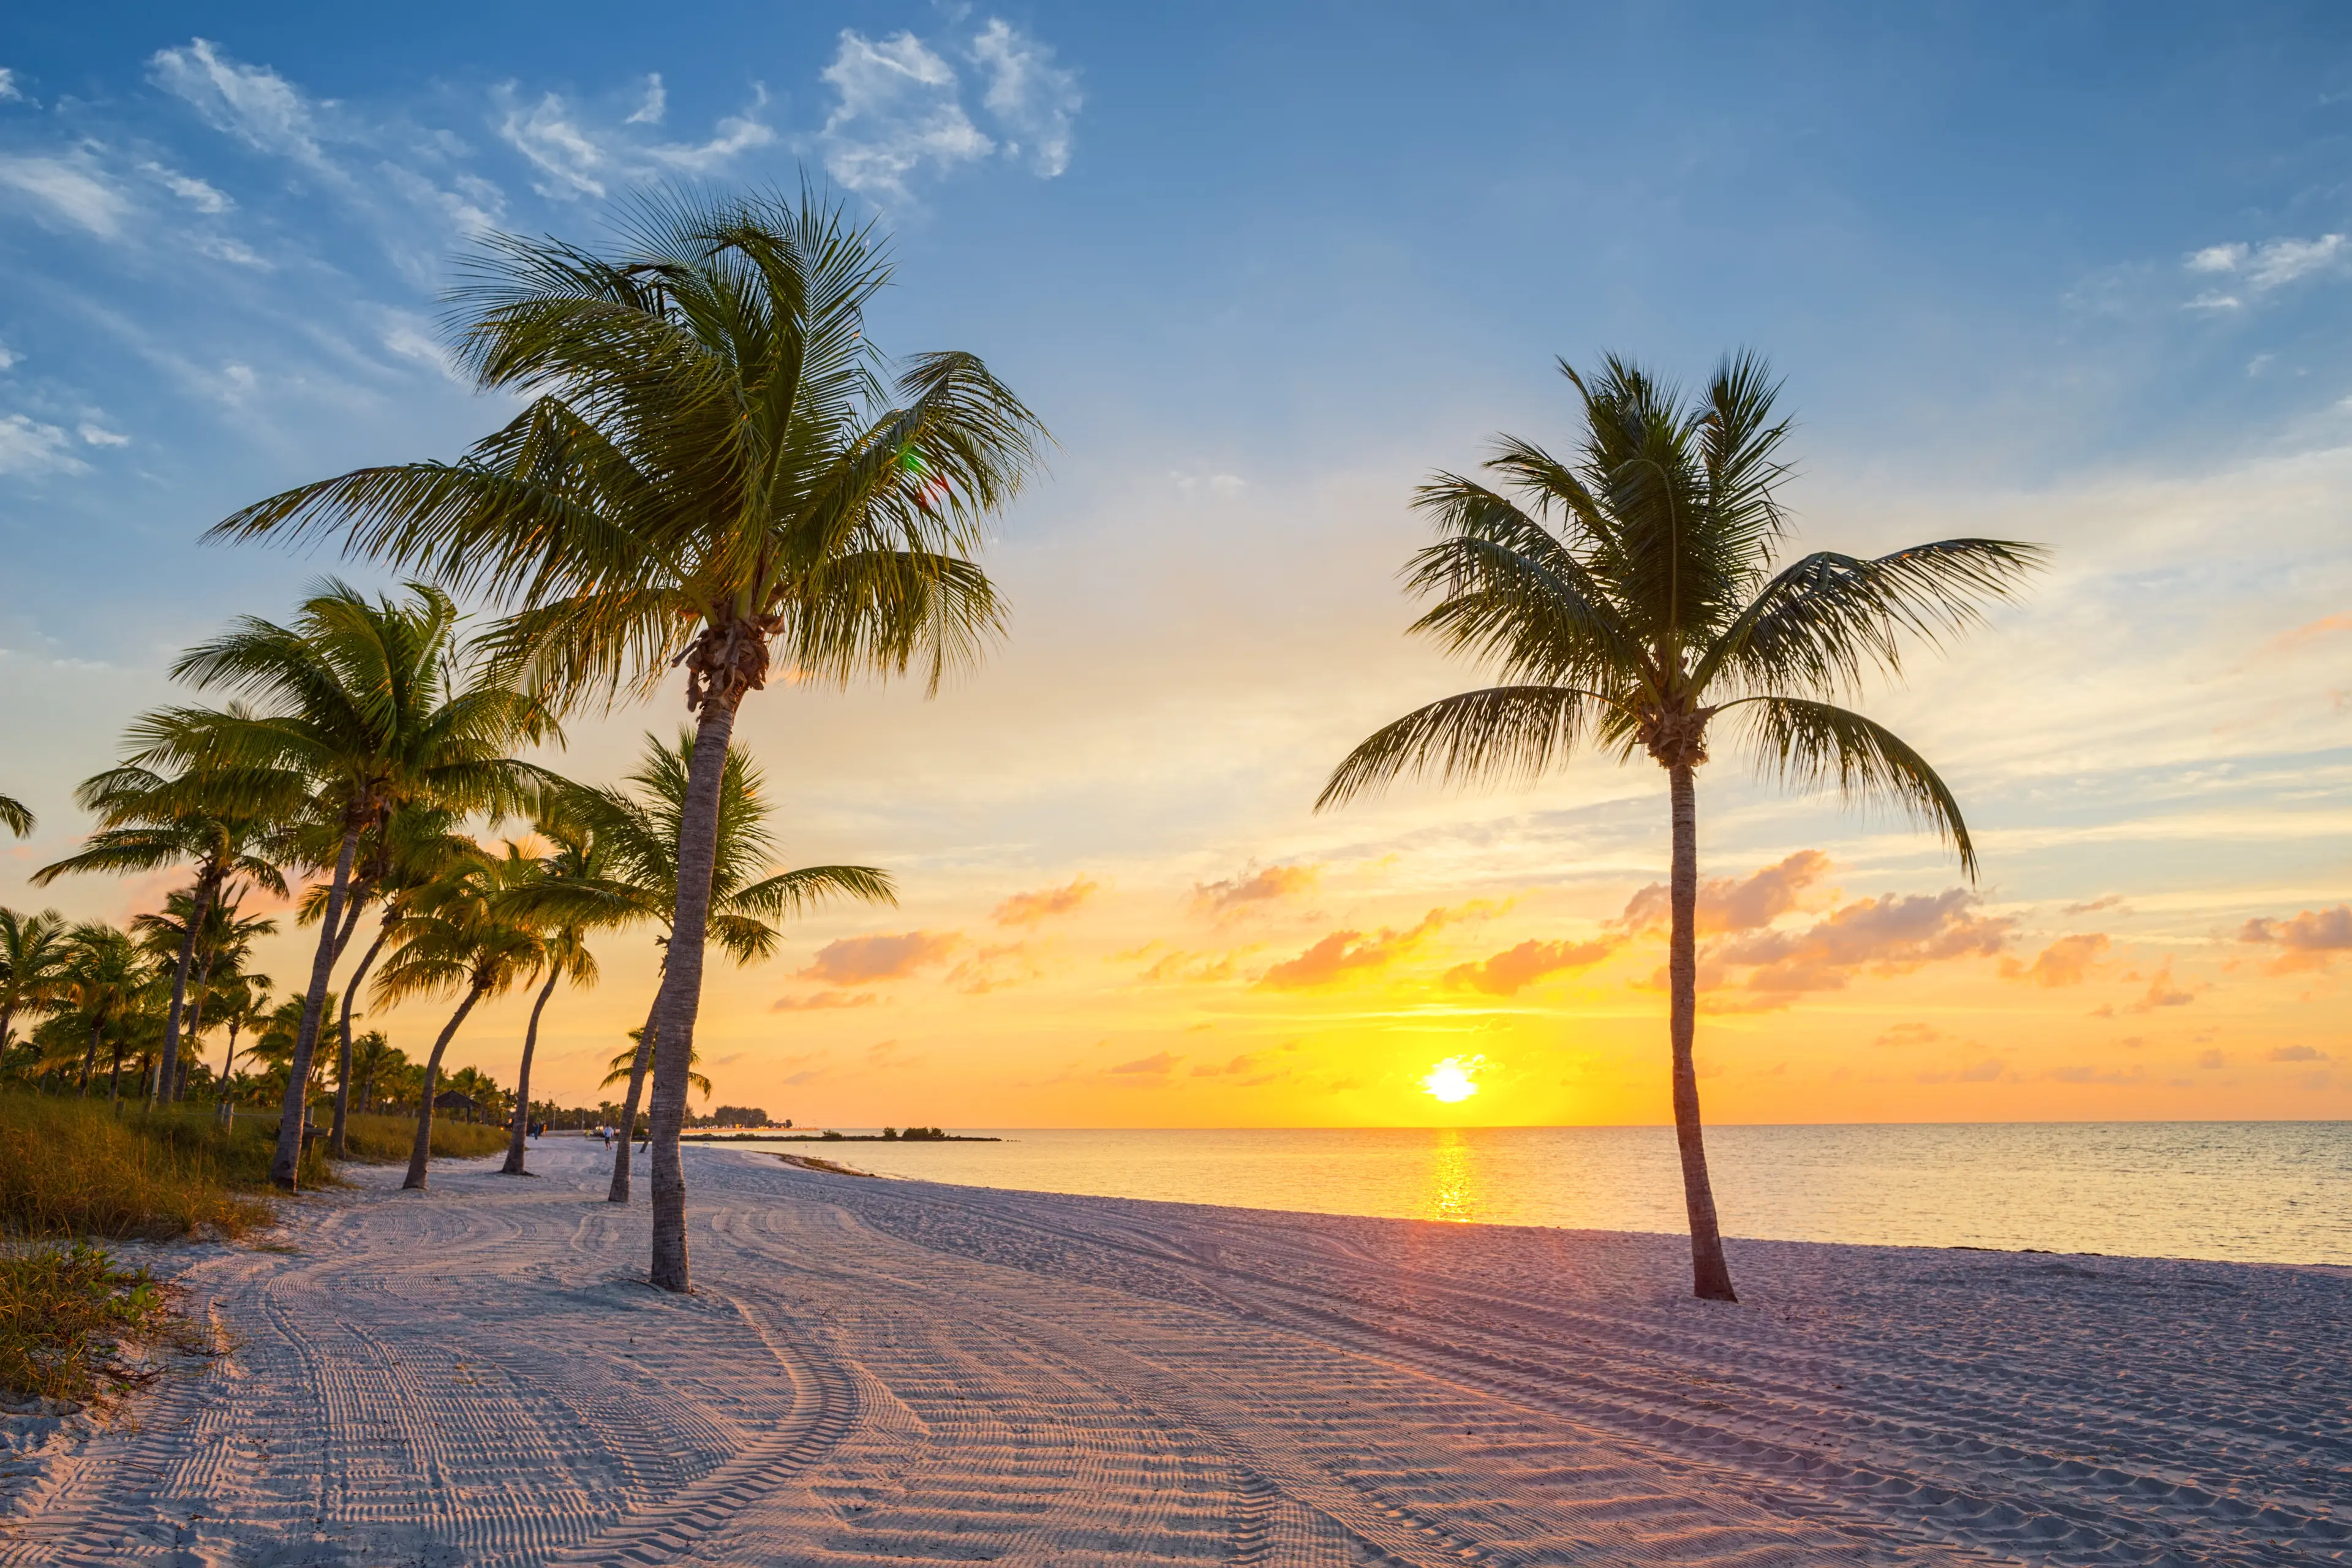 Sunrise on the Smathers beach in Key West